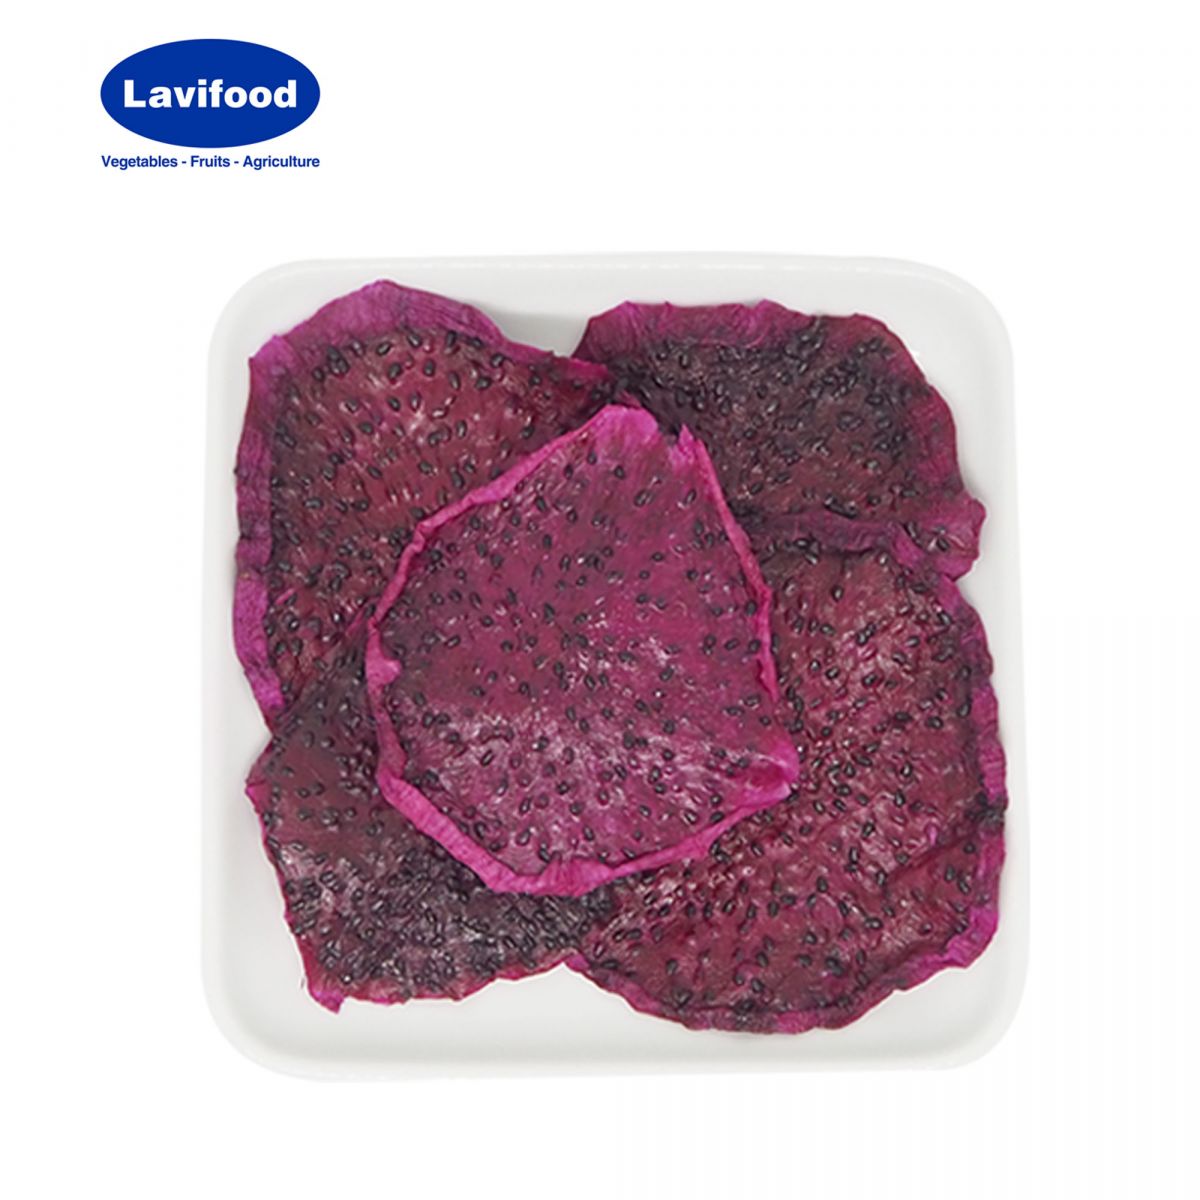 http://lavifood.com/en/products/dried-fruit-vegetables/dried-red-dragon-fruit